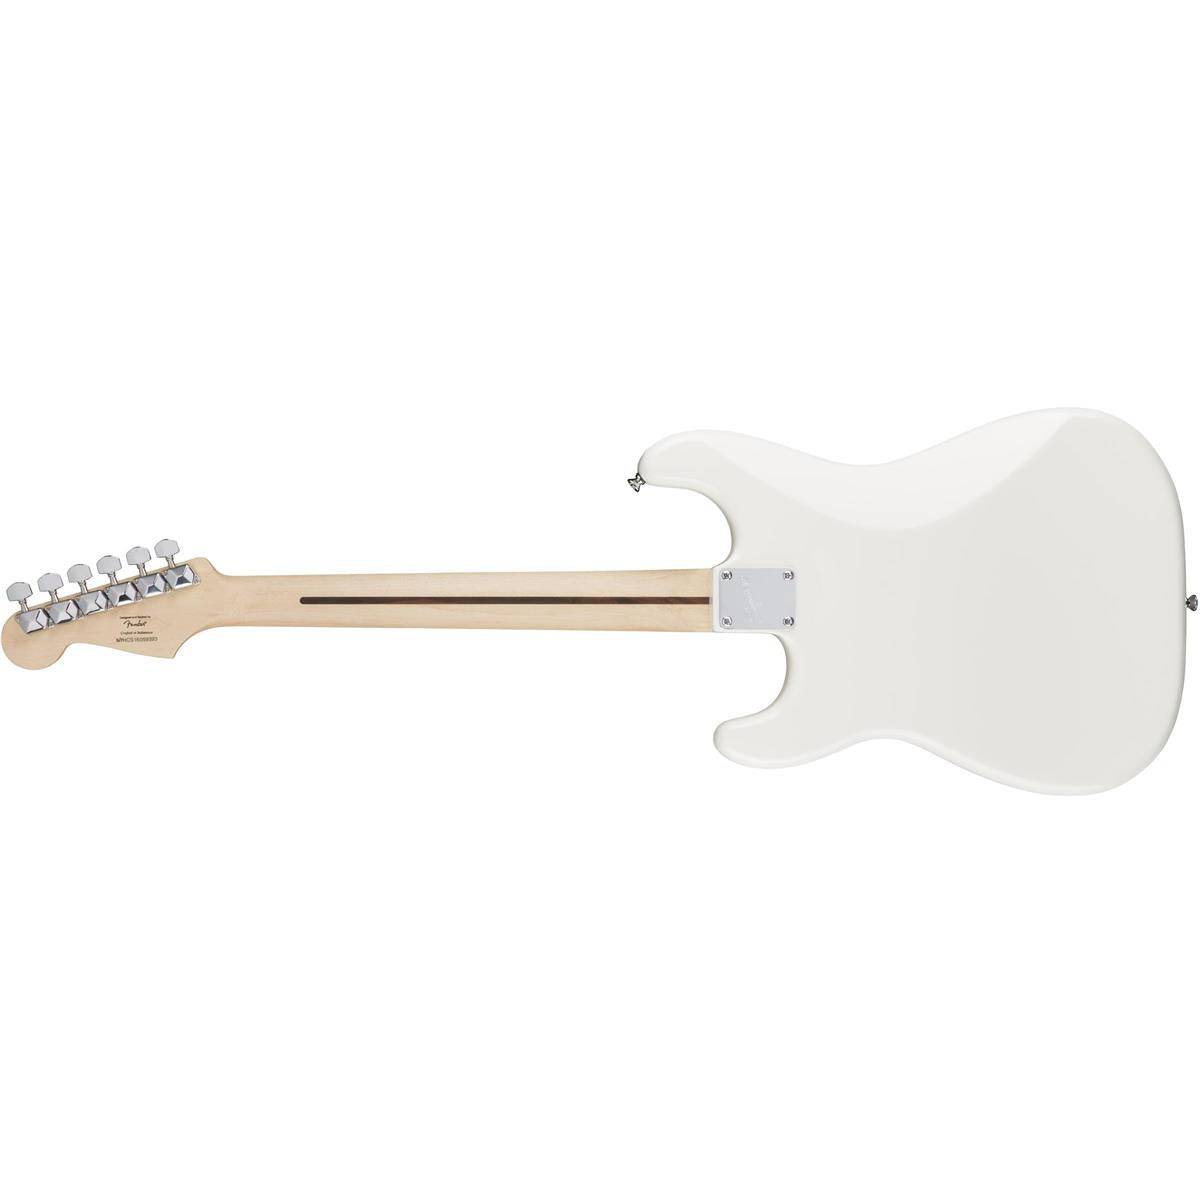 SQUIER BULLET STRATOCASTER HSS HARDTAIL ELECTRIC GUITAR - ARCTIC WHITE - Joondalup Music Centre